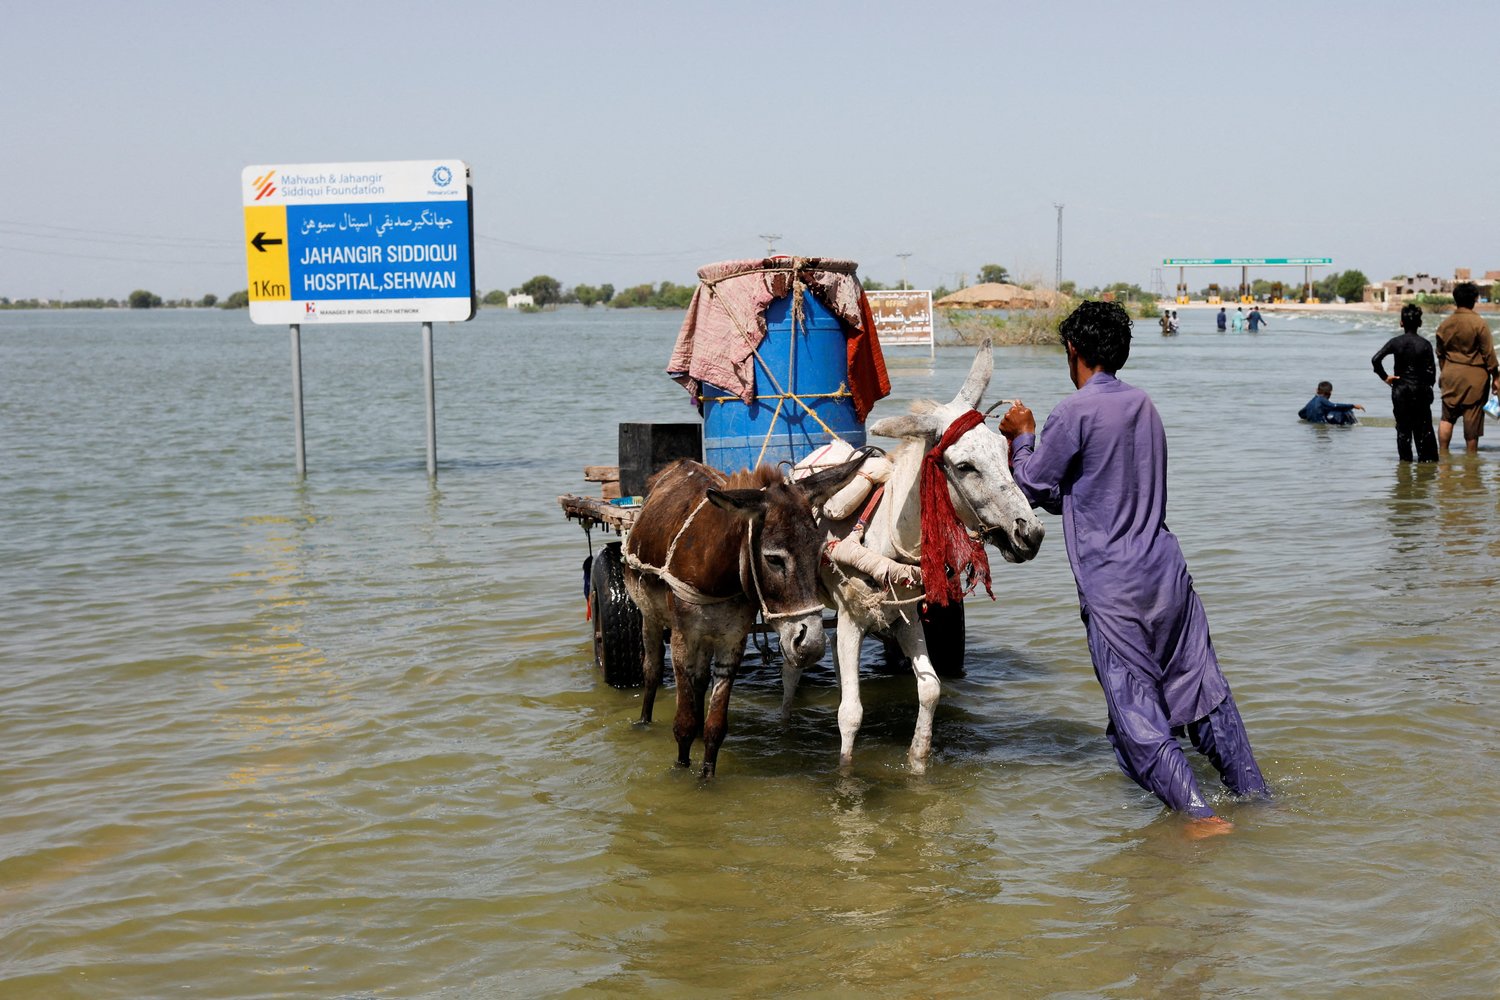 A flood victim pushes his donkey cart on a flooded highway following rains and floods in Sehwan, Pakistan Sept. 16 during a monsoon season impacted by climate change.